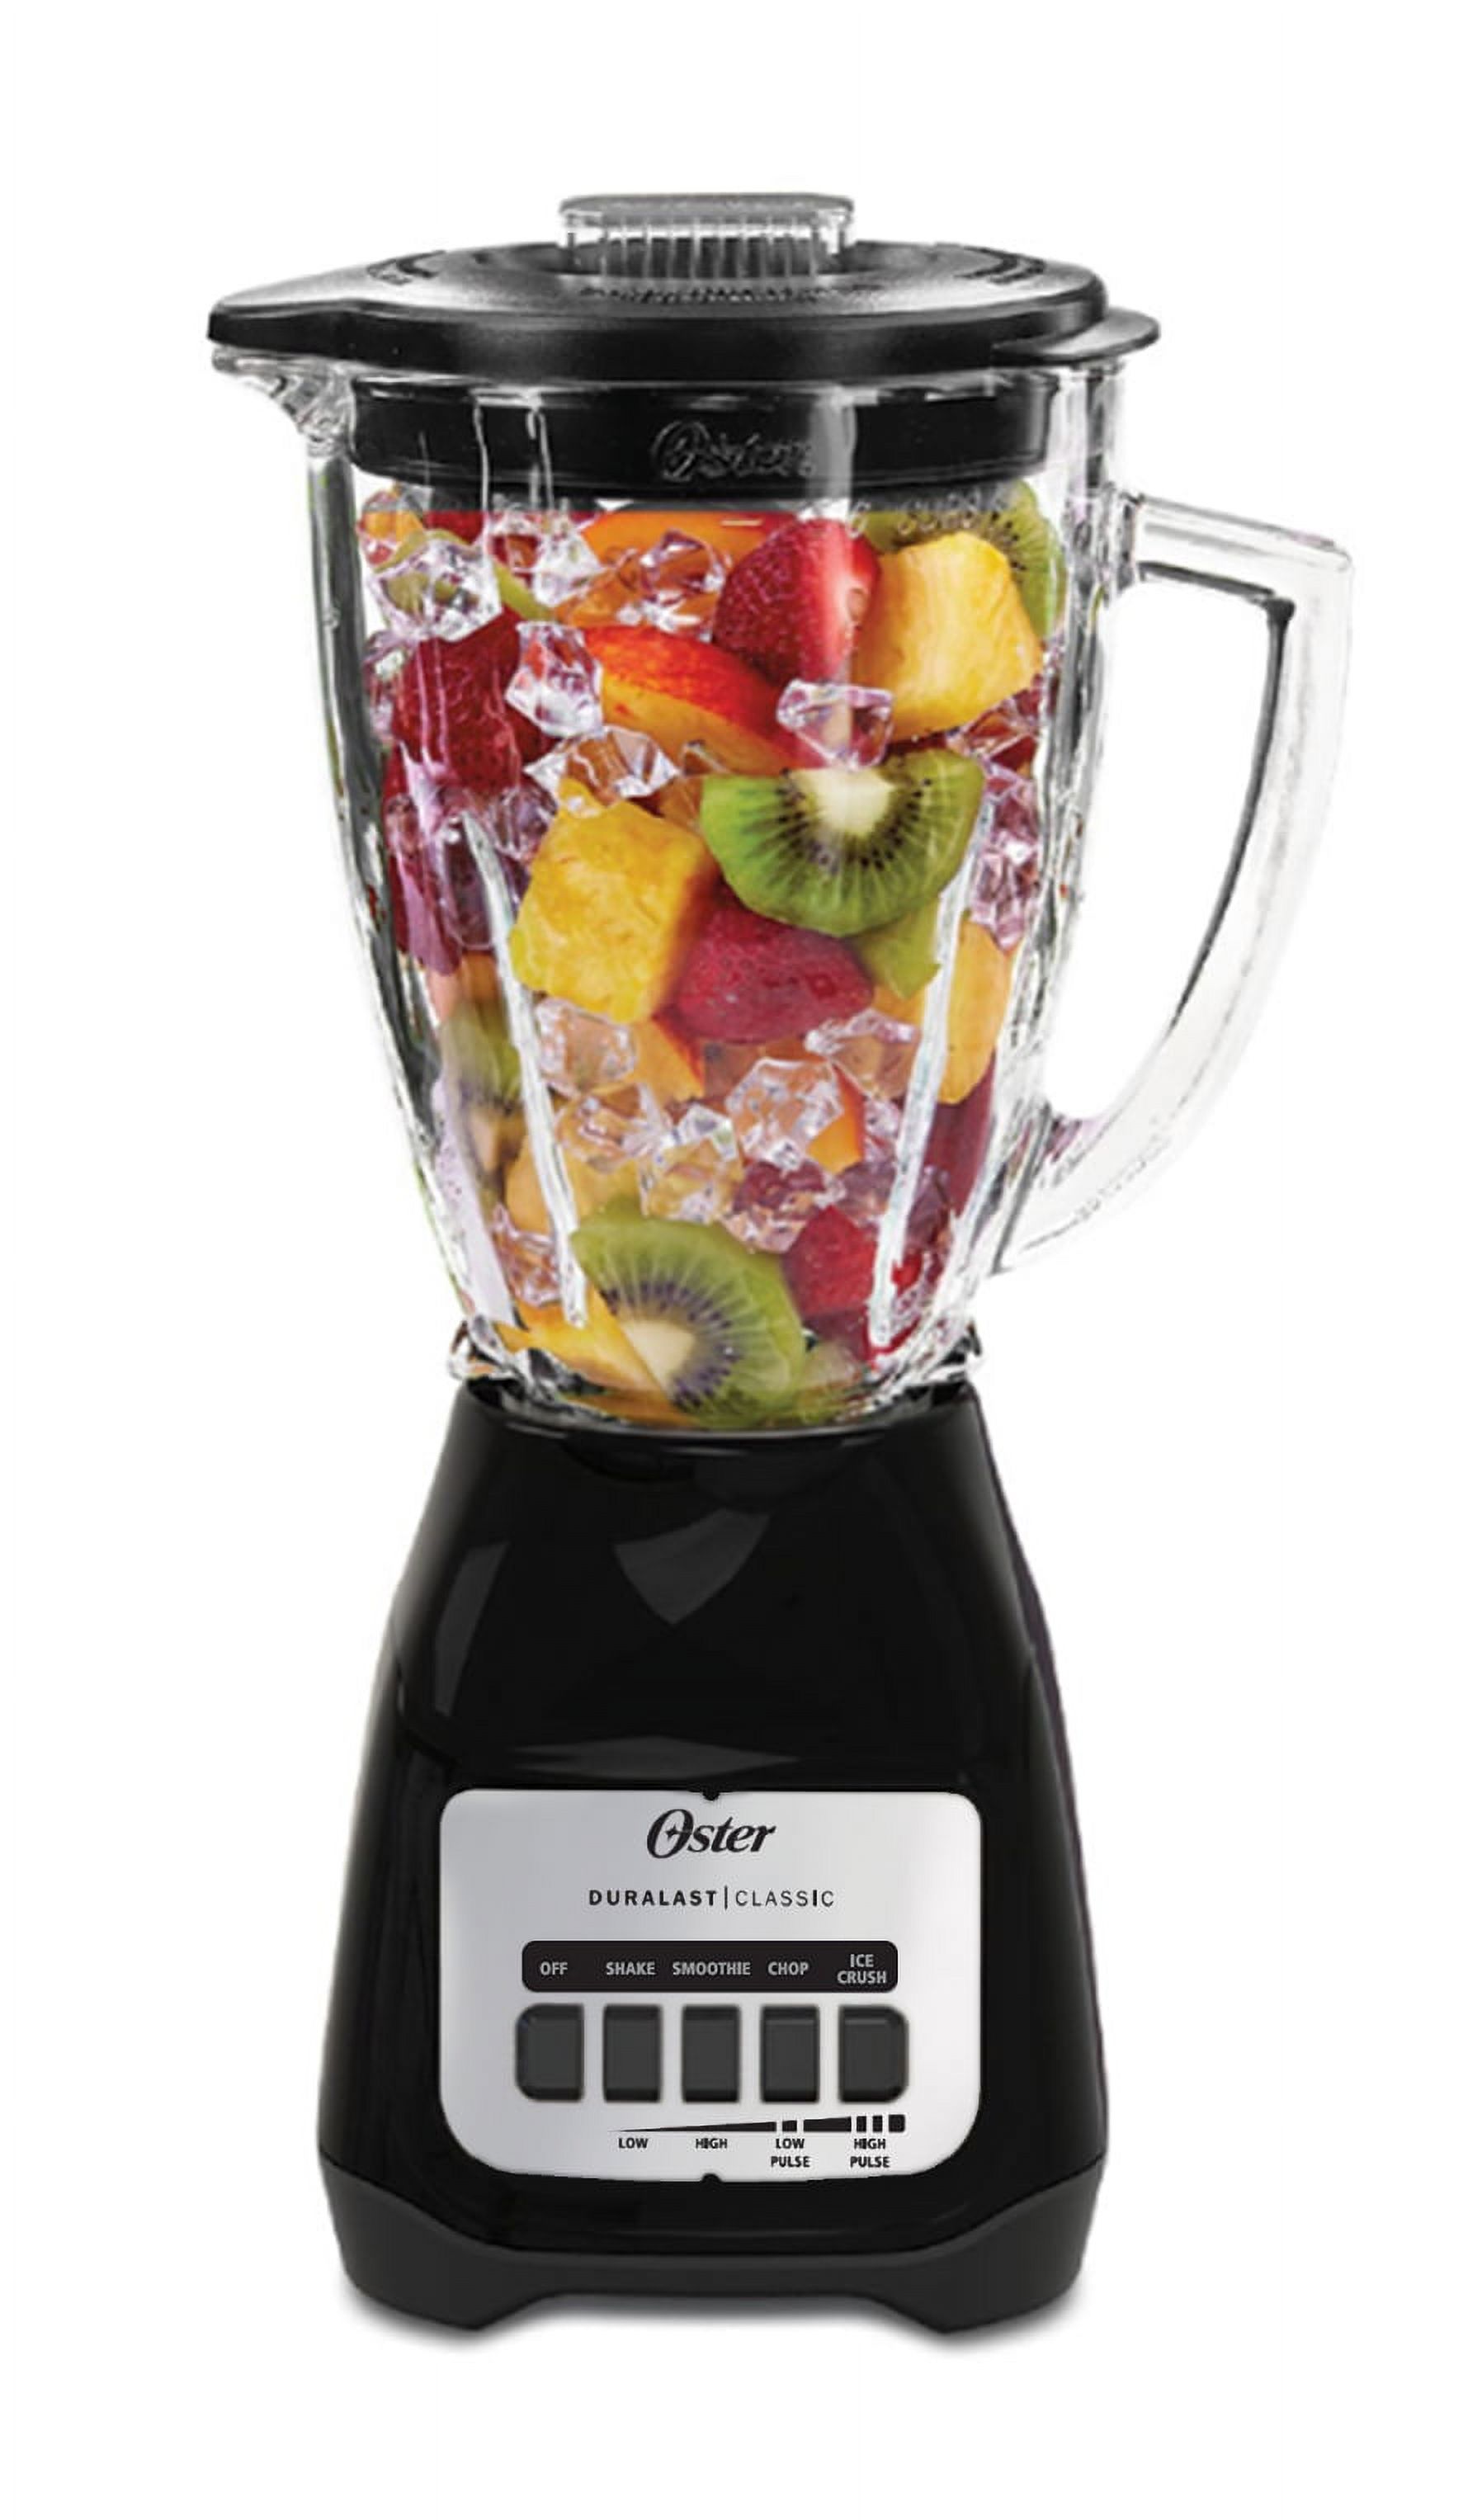 Oster Easy-to-Use Blender with 5-Speeds and 6-Cup Glass Jar, Black, New - image 1 of 9